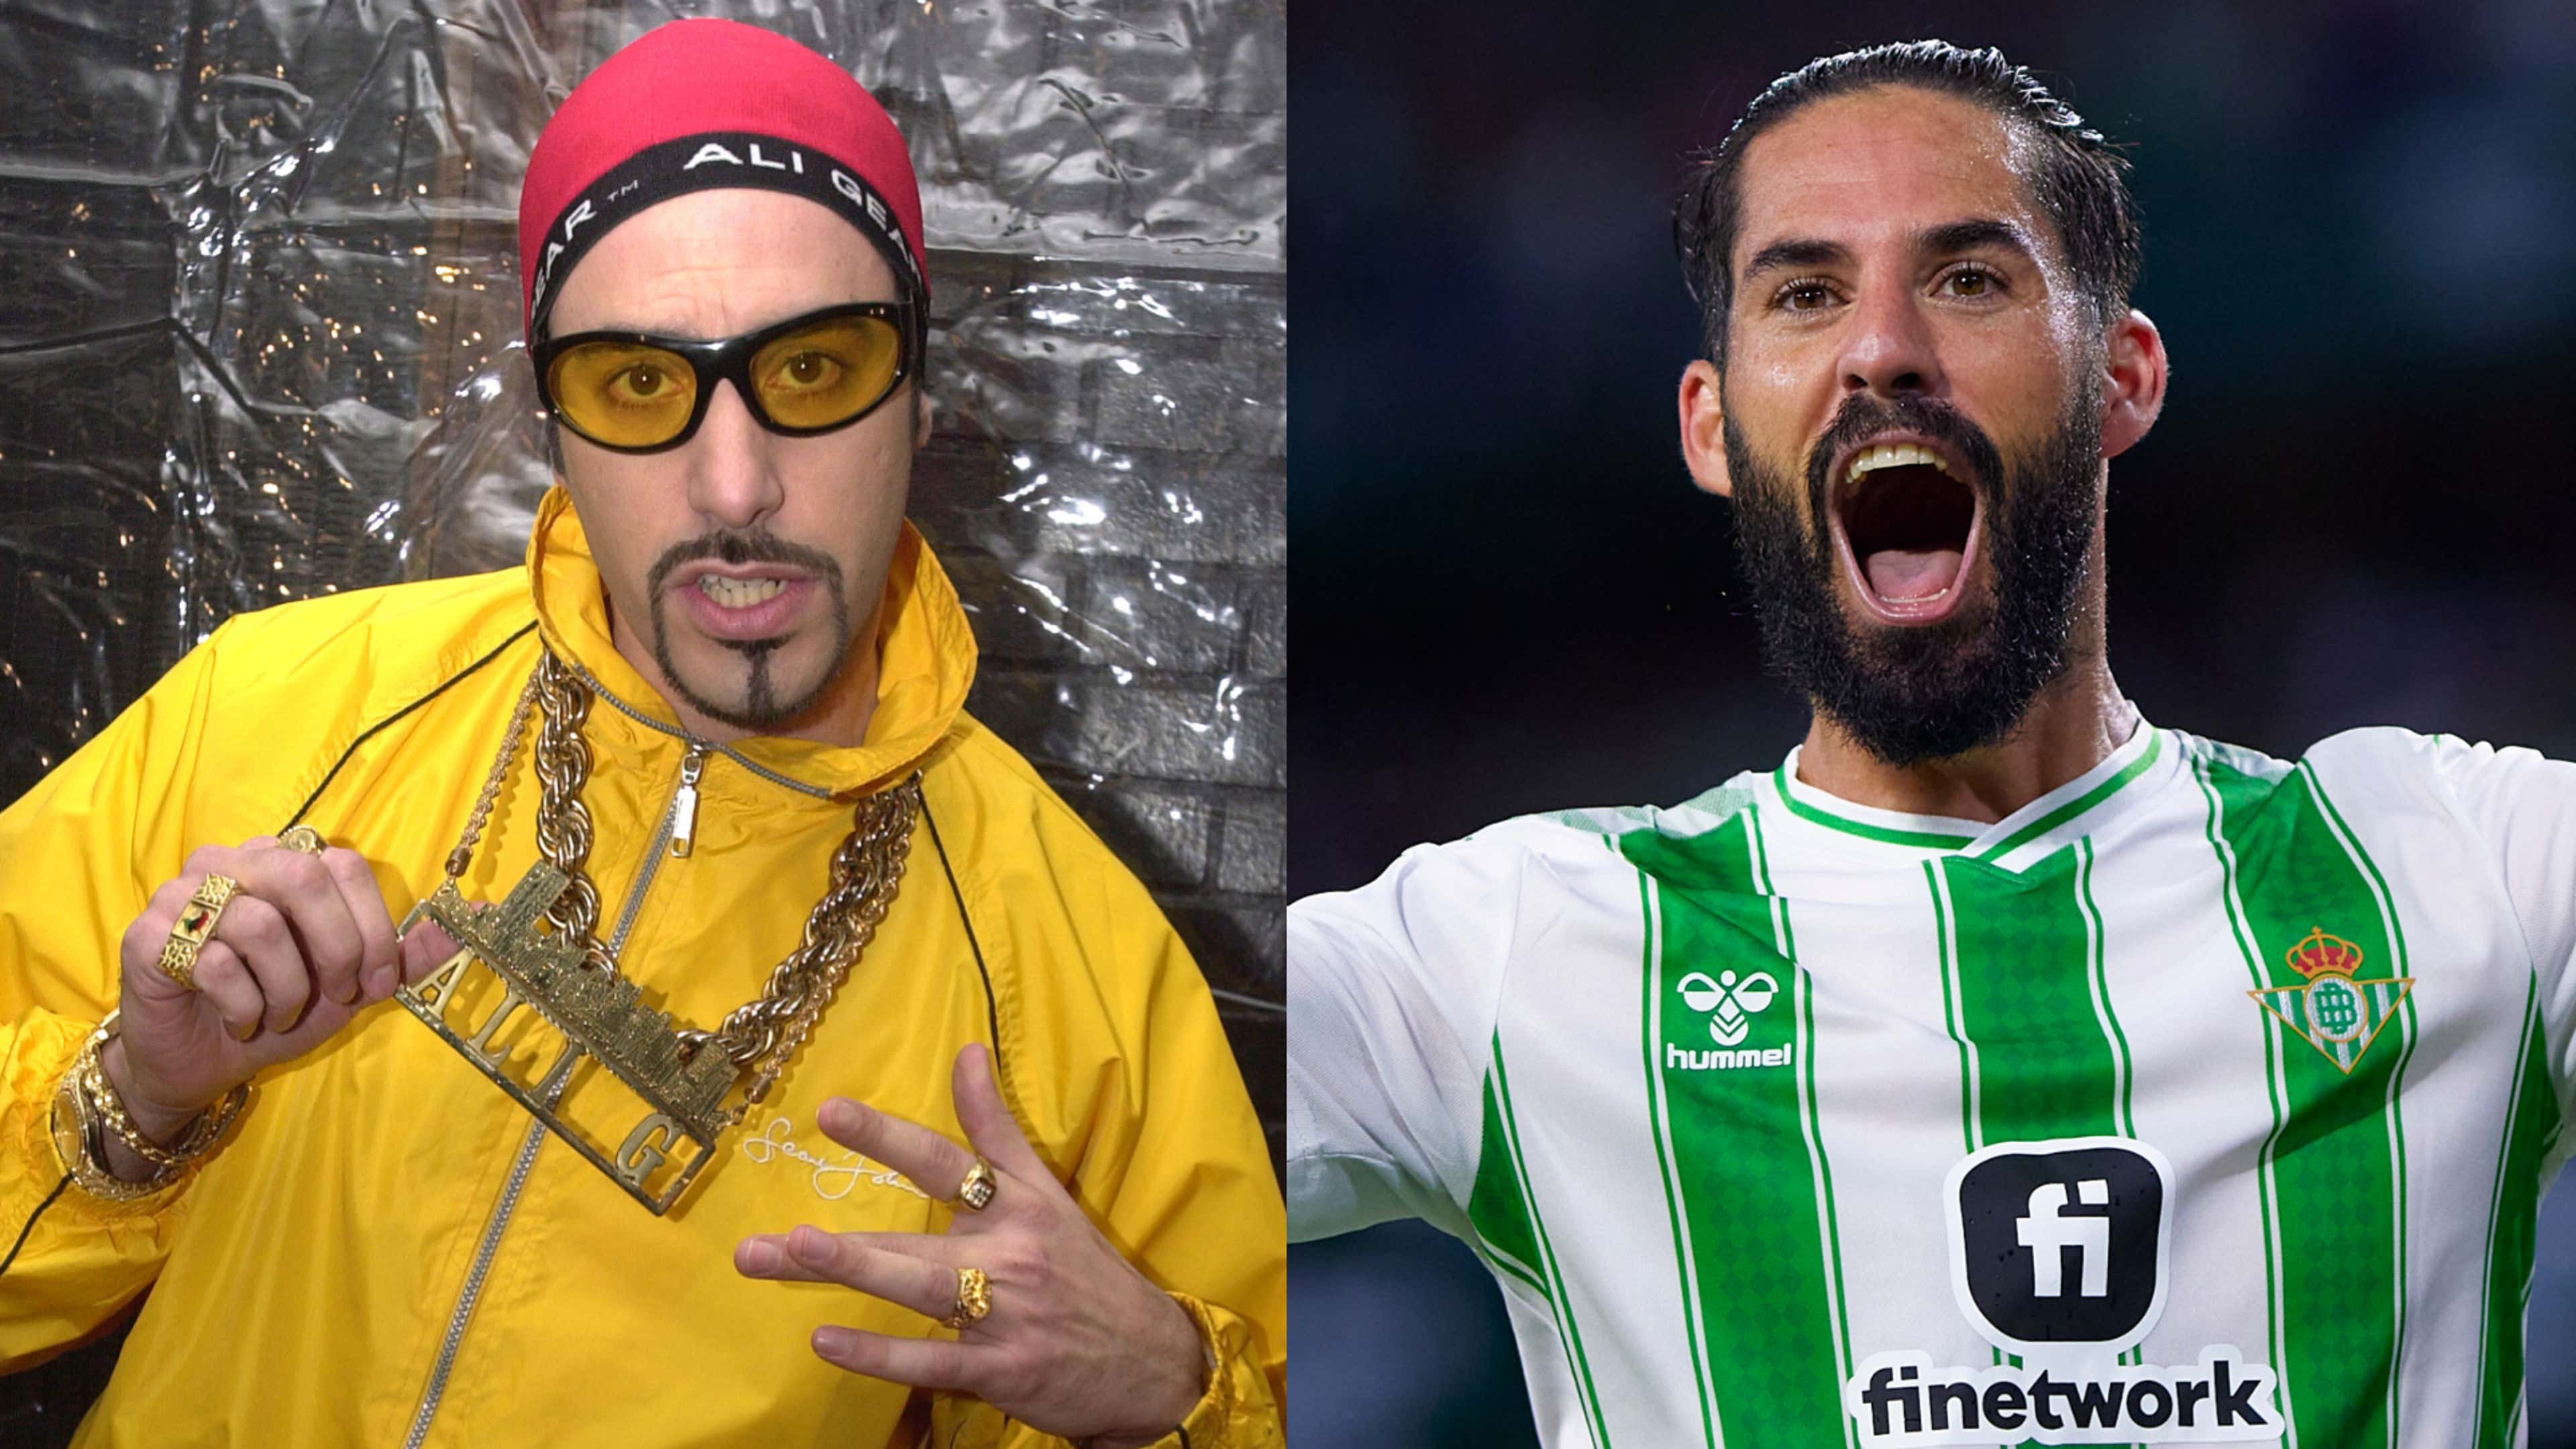 Ali G Indahouse! Bizarre video confirms Isco contract renewal with Real  Betis